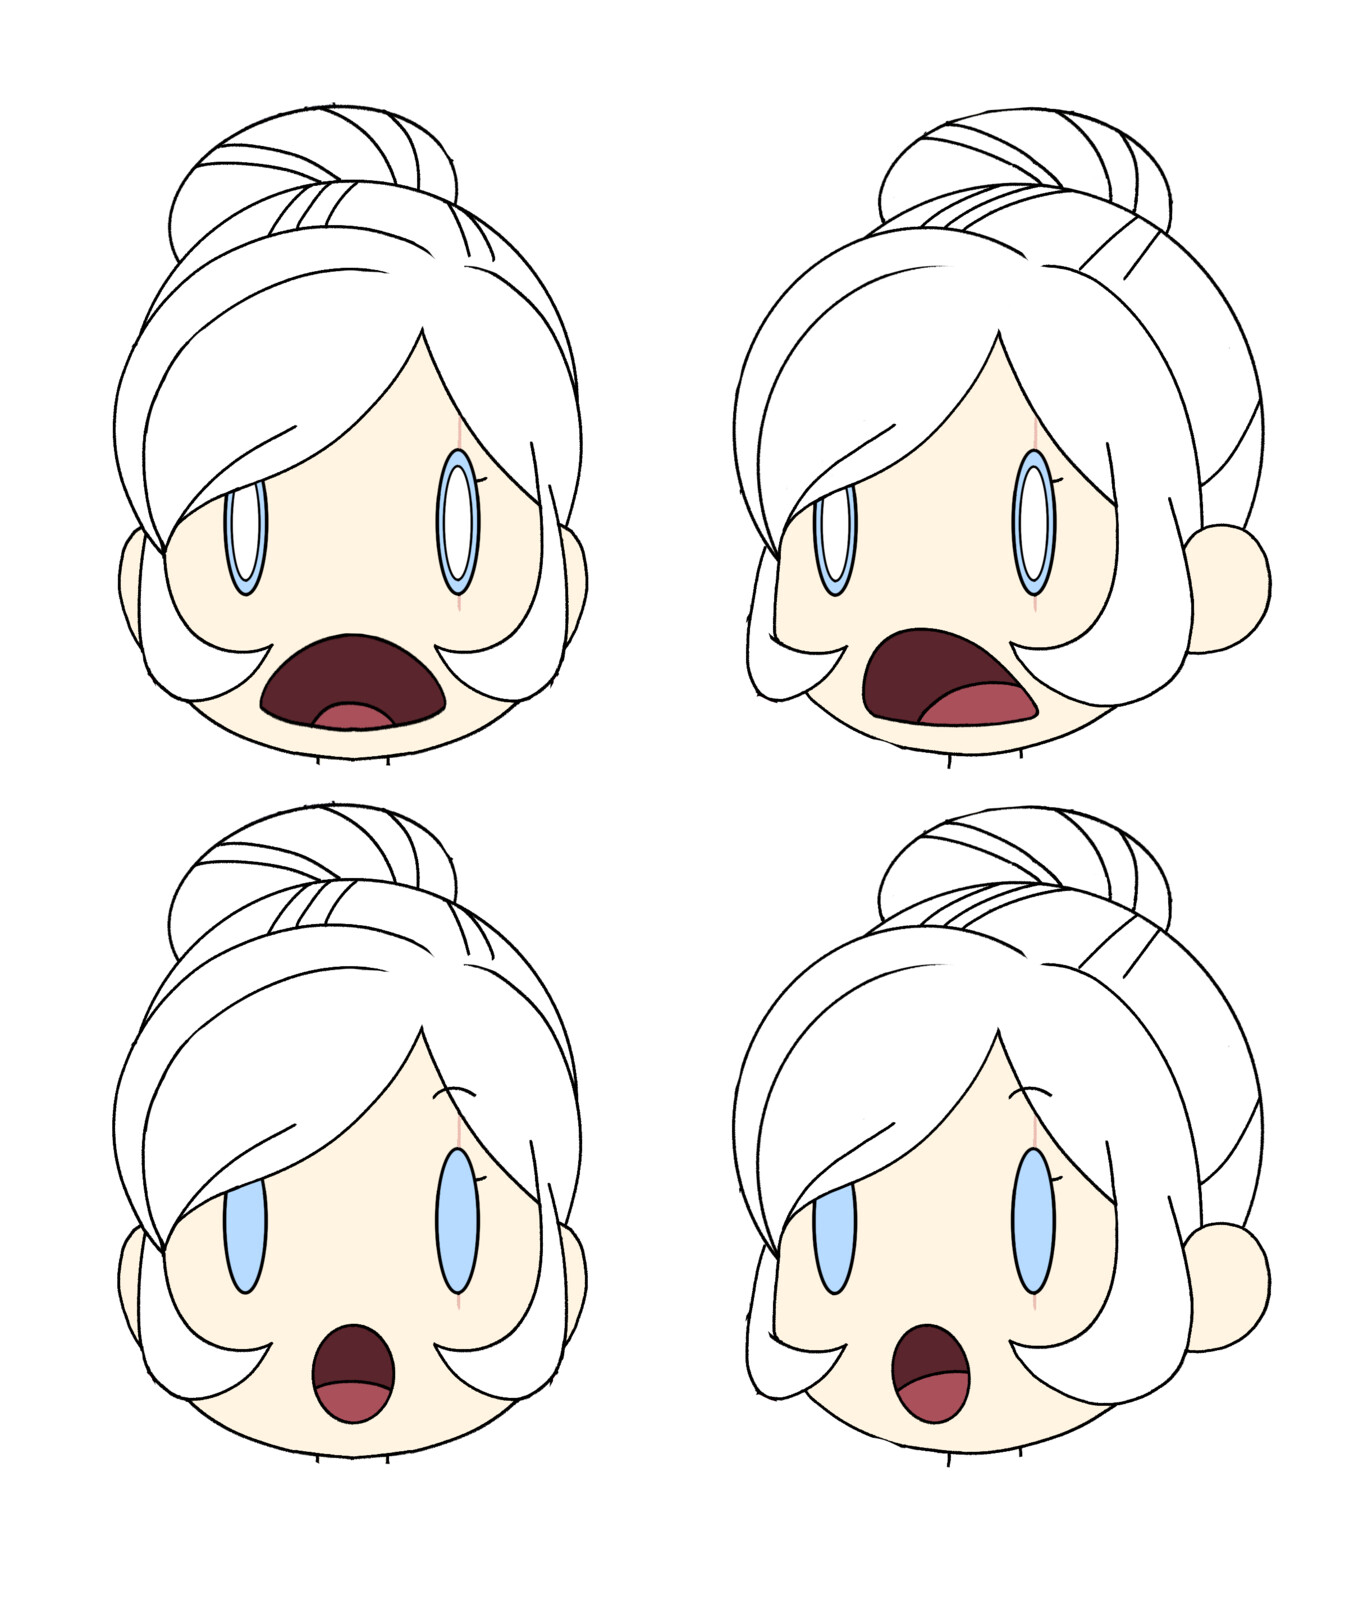 Weiss expressions